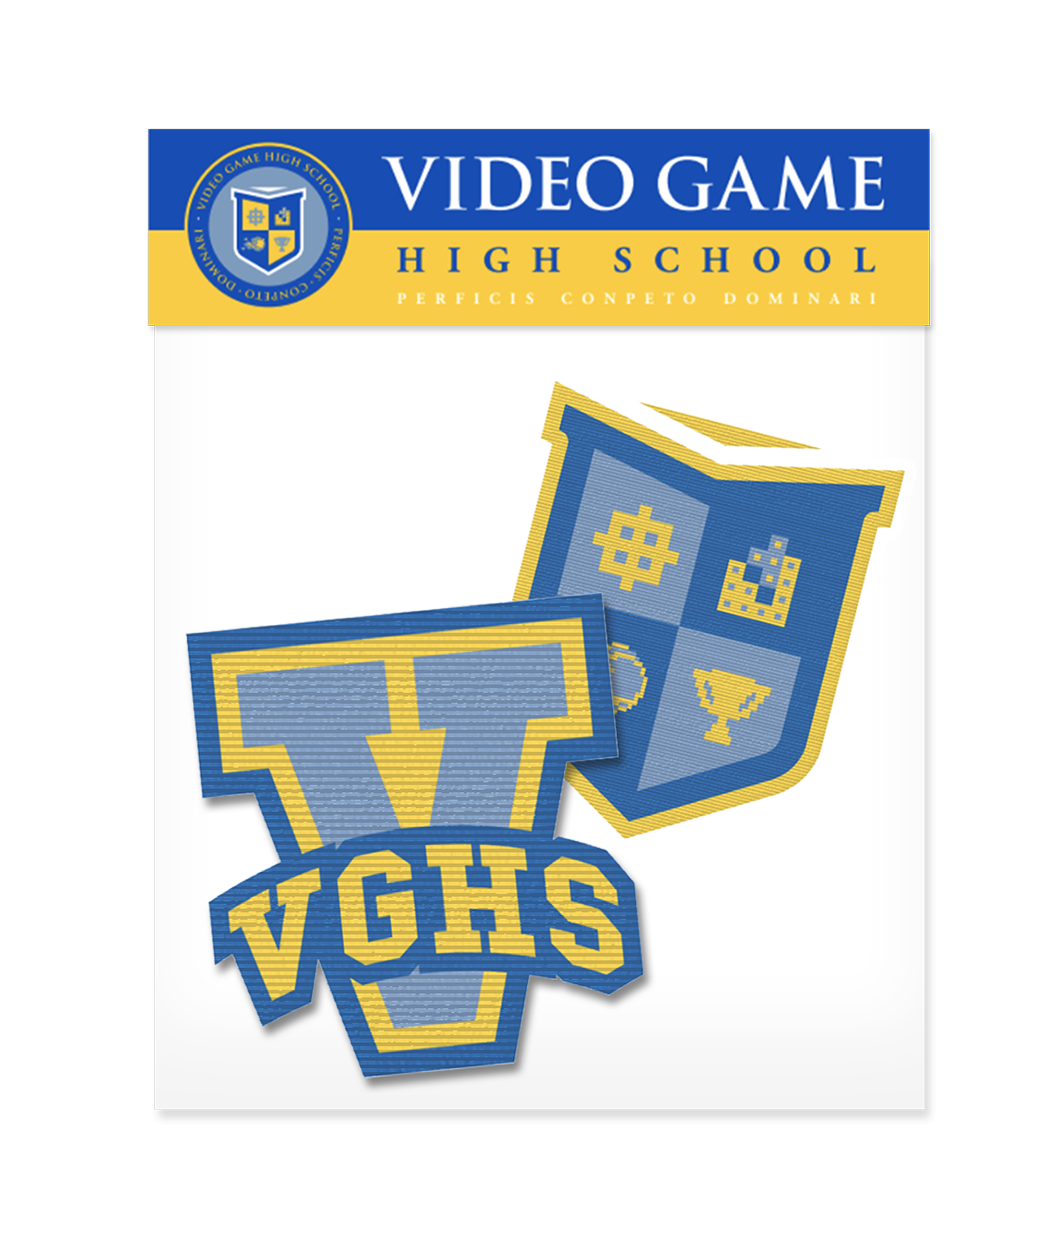 Polybag with Video Game High School Header card. Contains two patches. One V logo patch with VGHS on it in Blue and Yellow, then the VGHS Crest with the pixelated images in the four corners of the shield.